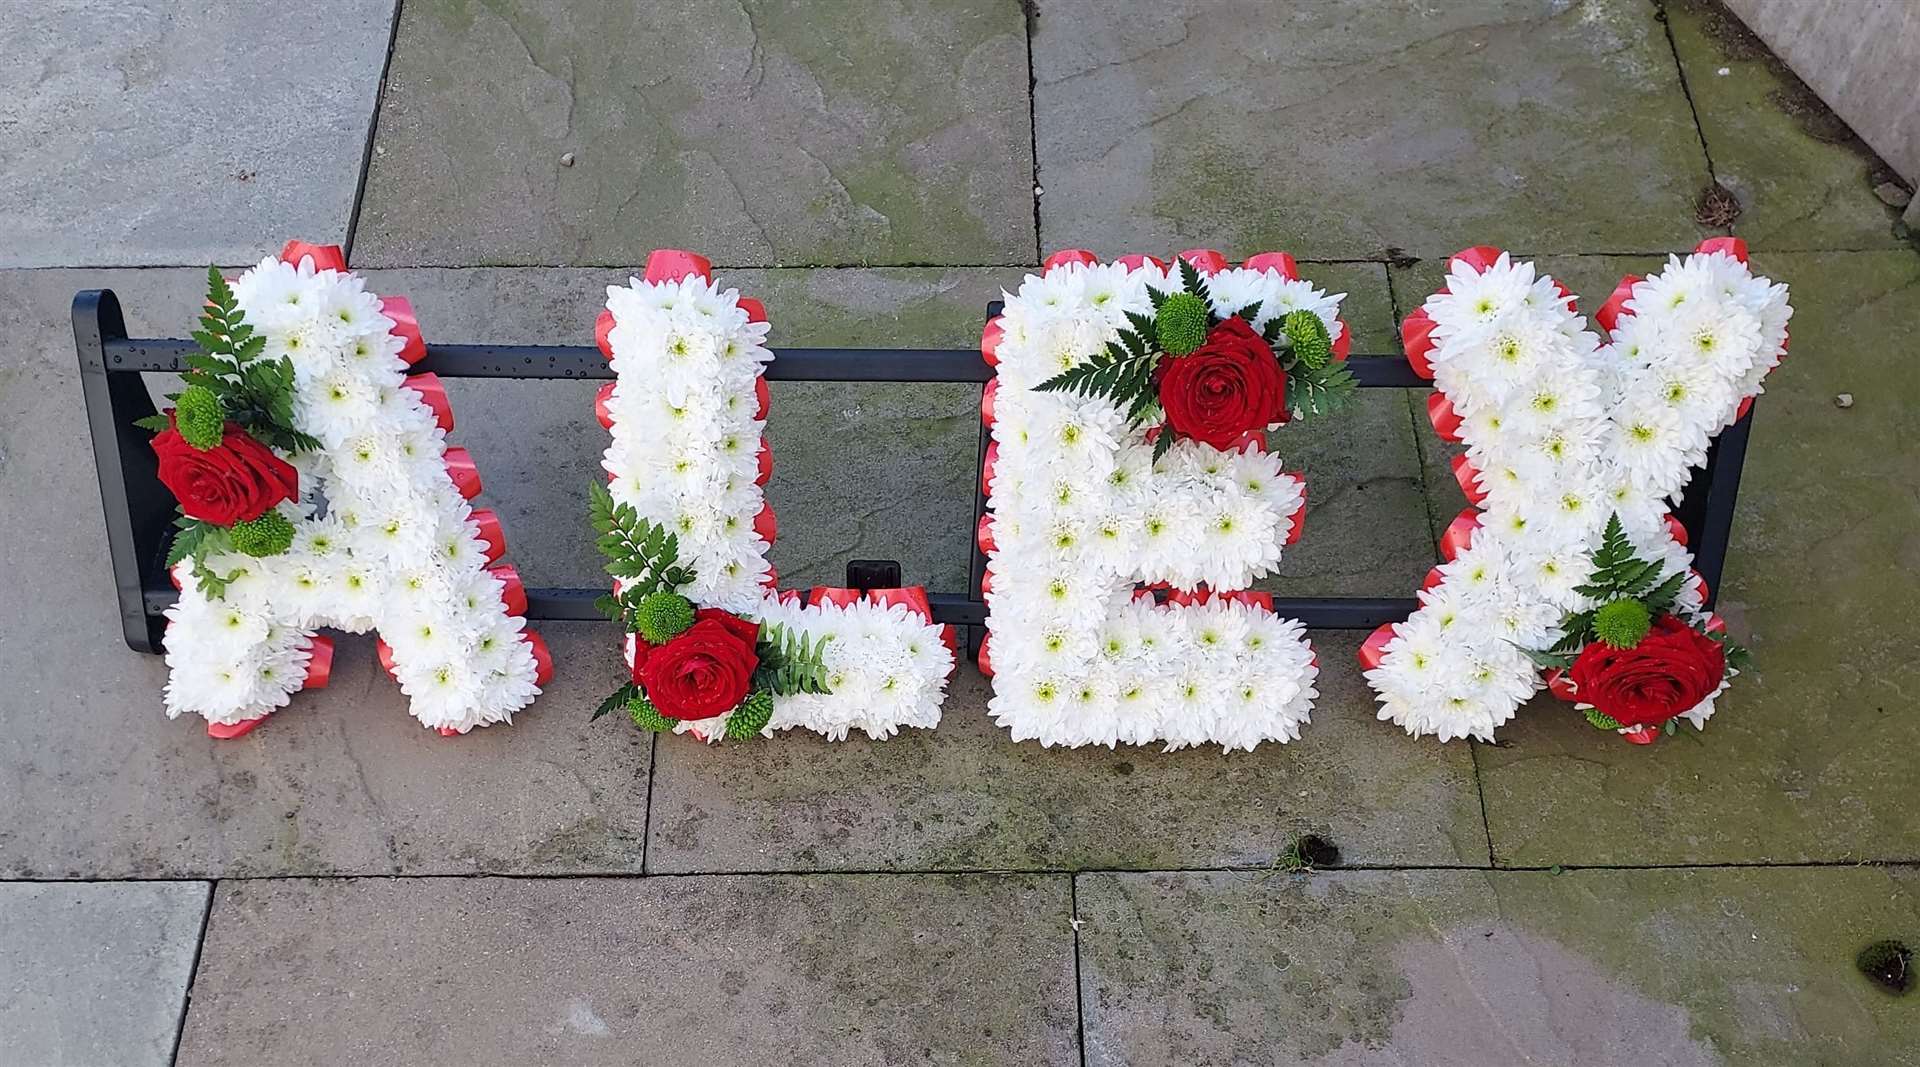 Alex's name was spelt out in flowers